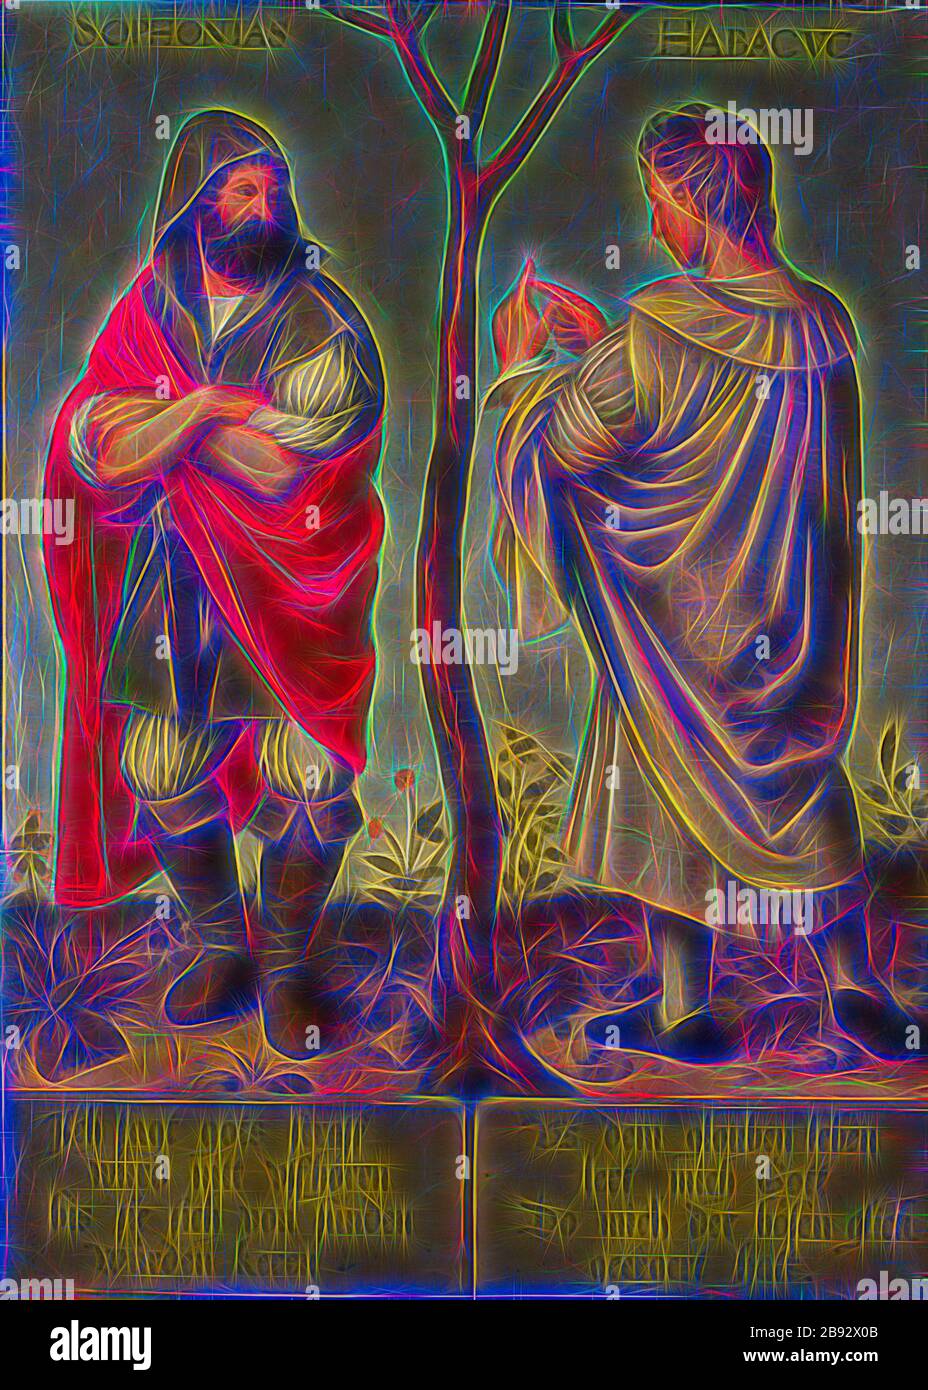 The prophets Zephaniah and Habakkuk, oil on canvas, 104 x 76 cm, unmarked., About the figures: SOPHONIAS and HABACVC, Bottom left: I say gots taut or did not uffho until they know about sund, wu [e]., Bottom right: Us the globen live, teaches me God, Do me the boozy glick, has erergiert., Bartholomäus Sarburgh, Trier um 1590 – nach 1637 Niederlande, Hans Holbein d. J., (Kopie nach / copy after), Augsburg um 1497/98–1543 London, Reimagined by Gibon, design of warm cheerful glowing of brightness and light rays radiance. Classic art reinvented with a modern twist. Photography inspired by futurism Stock Photo